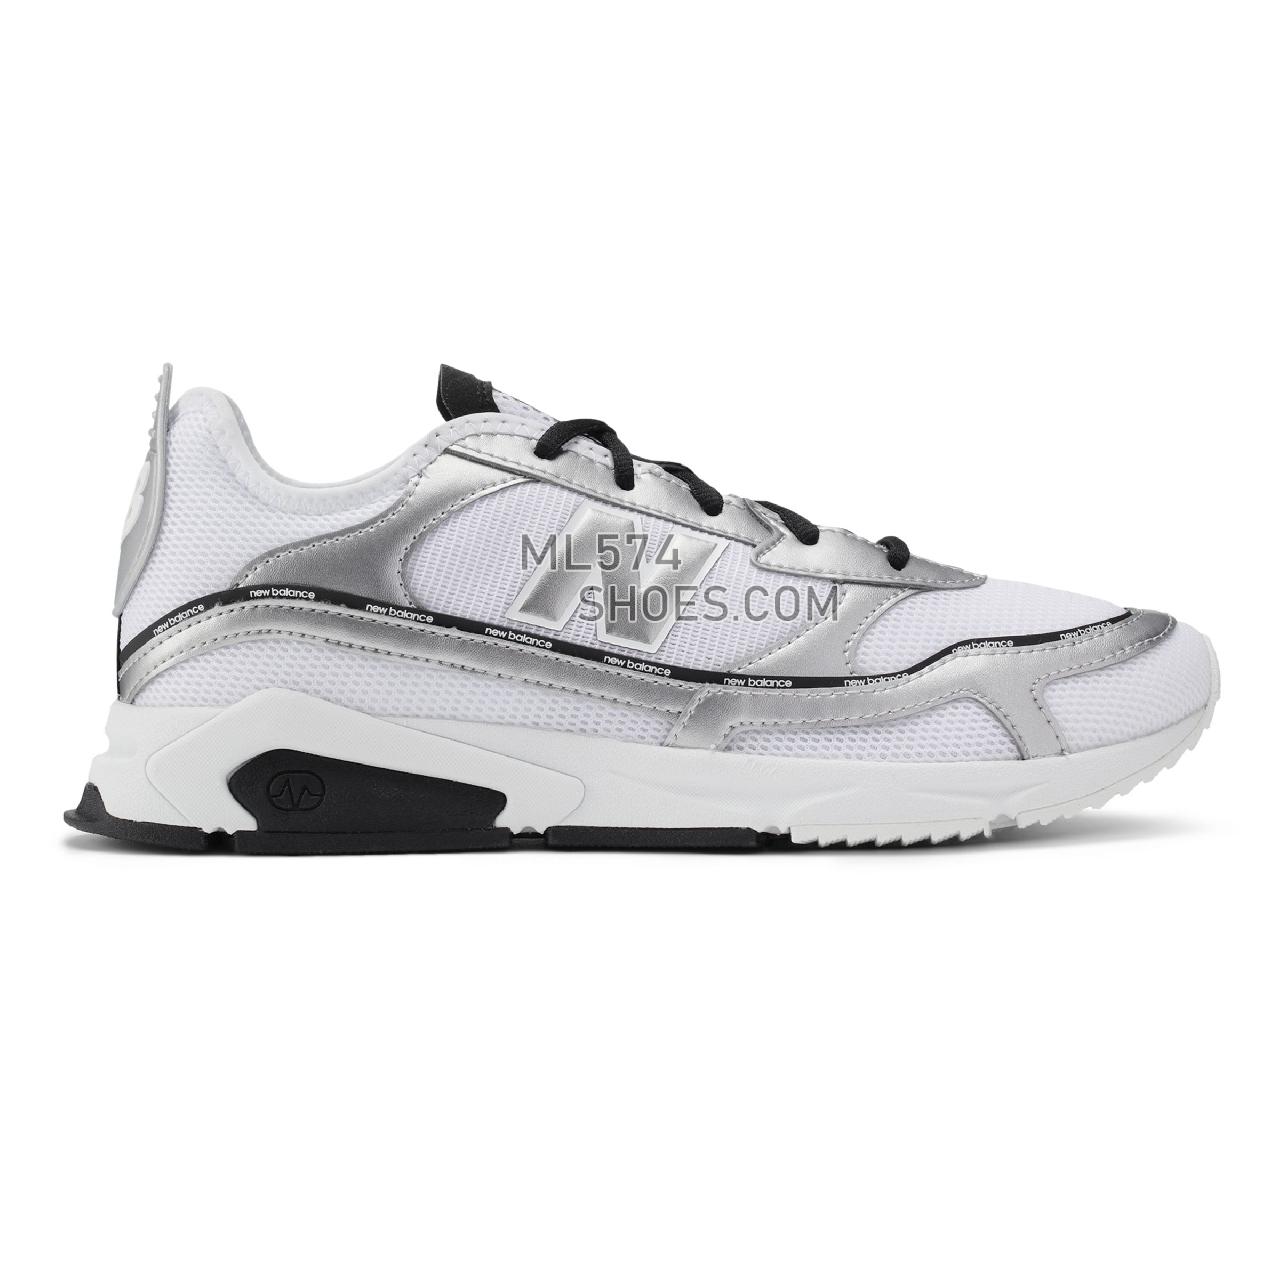 New Balance X-Racer - Women's Sport Style Sneakers - Munsell White with Silver Metallic - WSXRCHLC